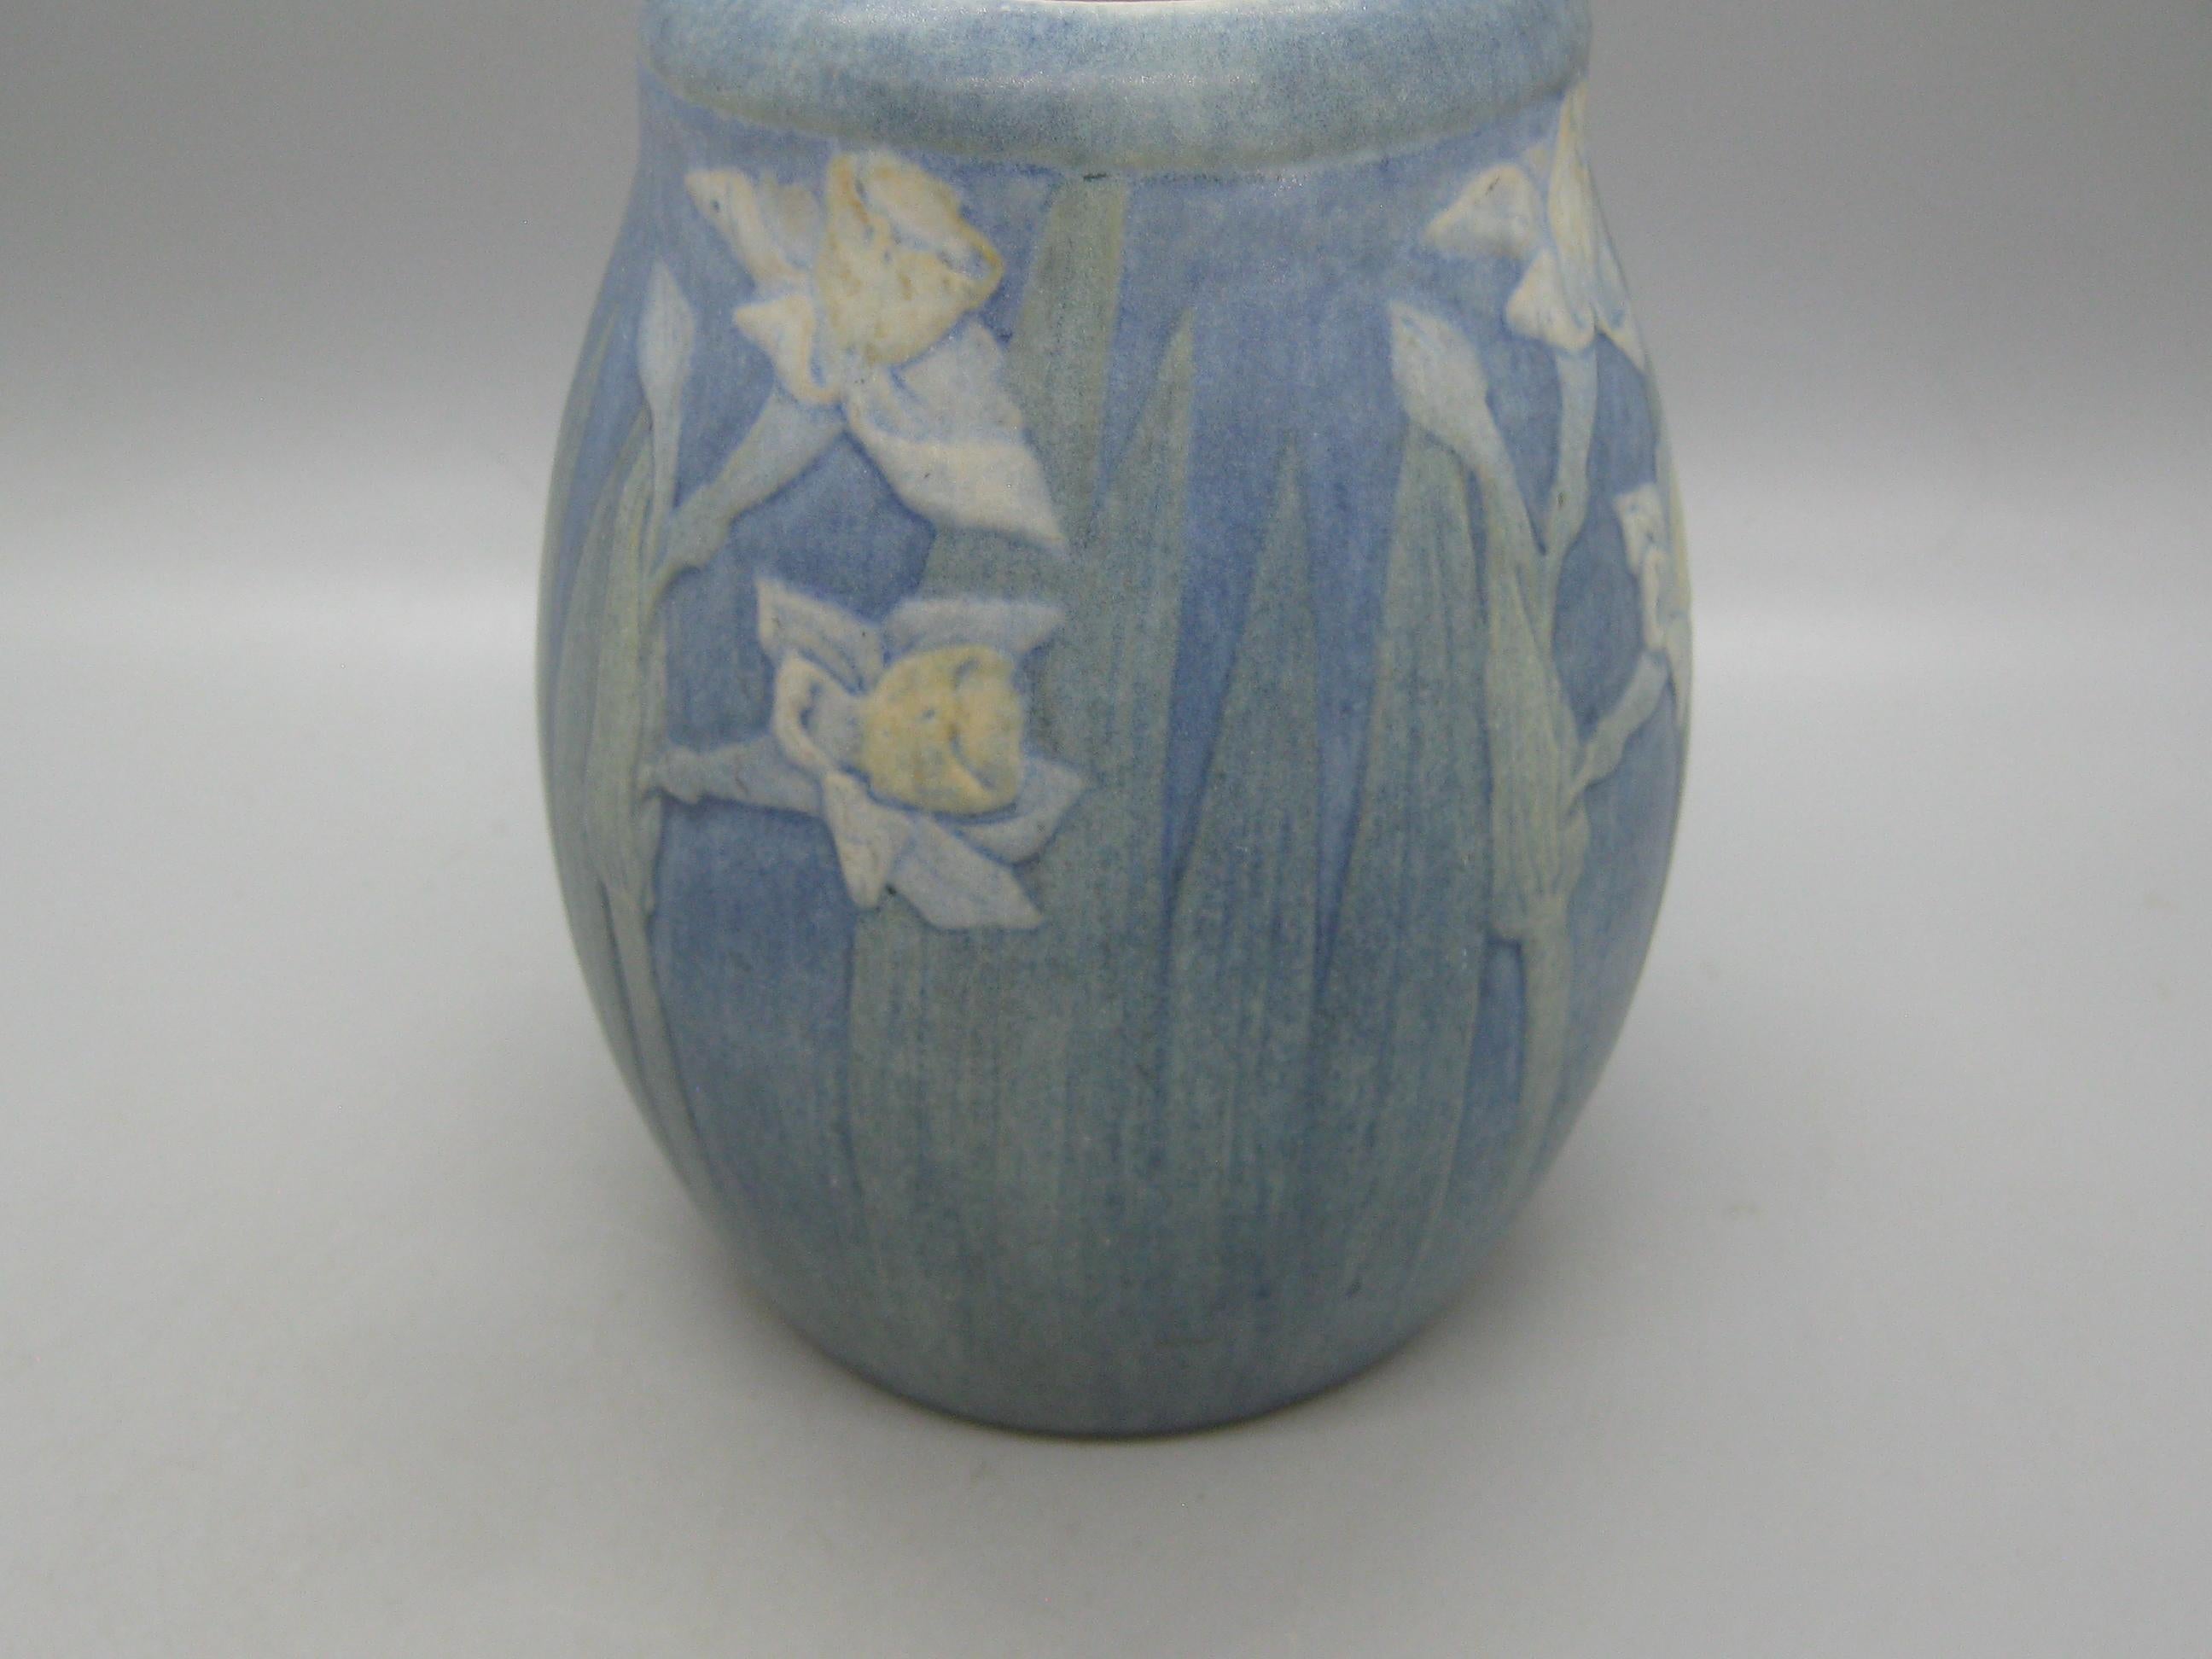 American Antique 1914 Arts & Crafts Newcomb College Art Pottery Daffodils Vase